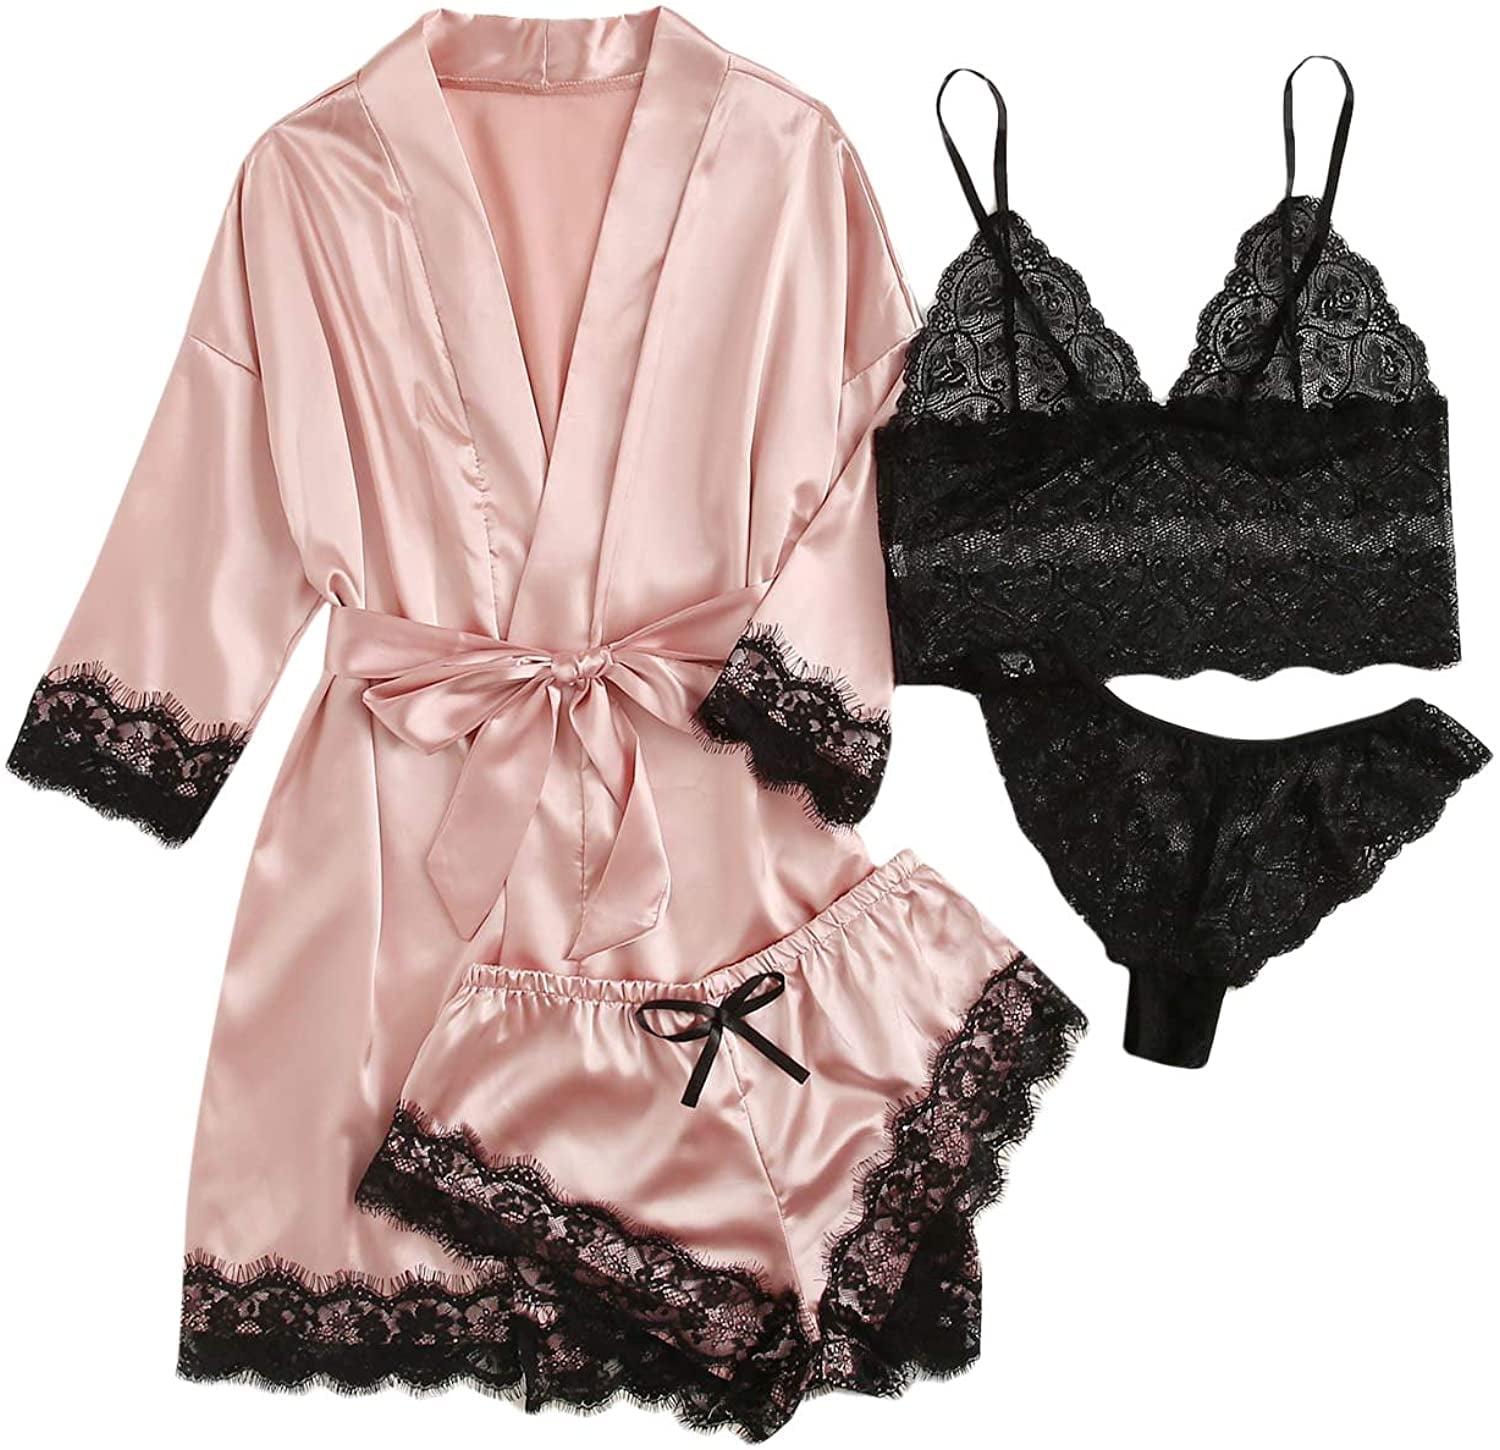 This $22 Lingerie Set Has Over 29,000 Five-Star Reviews on